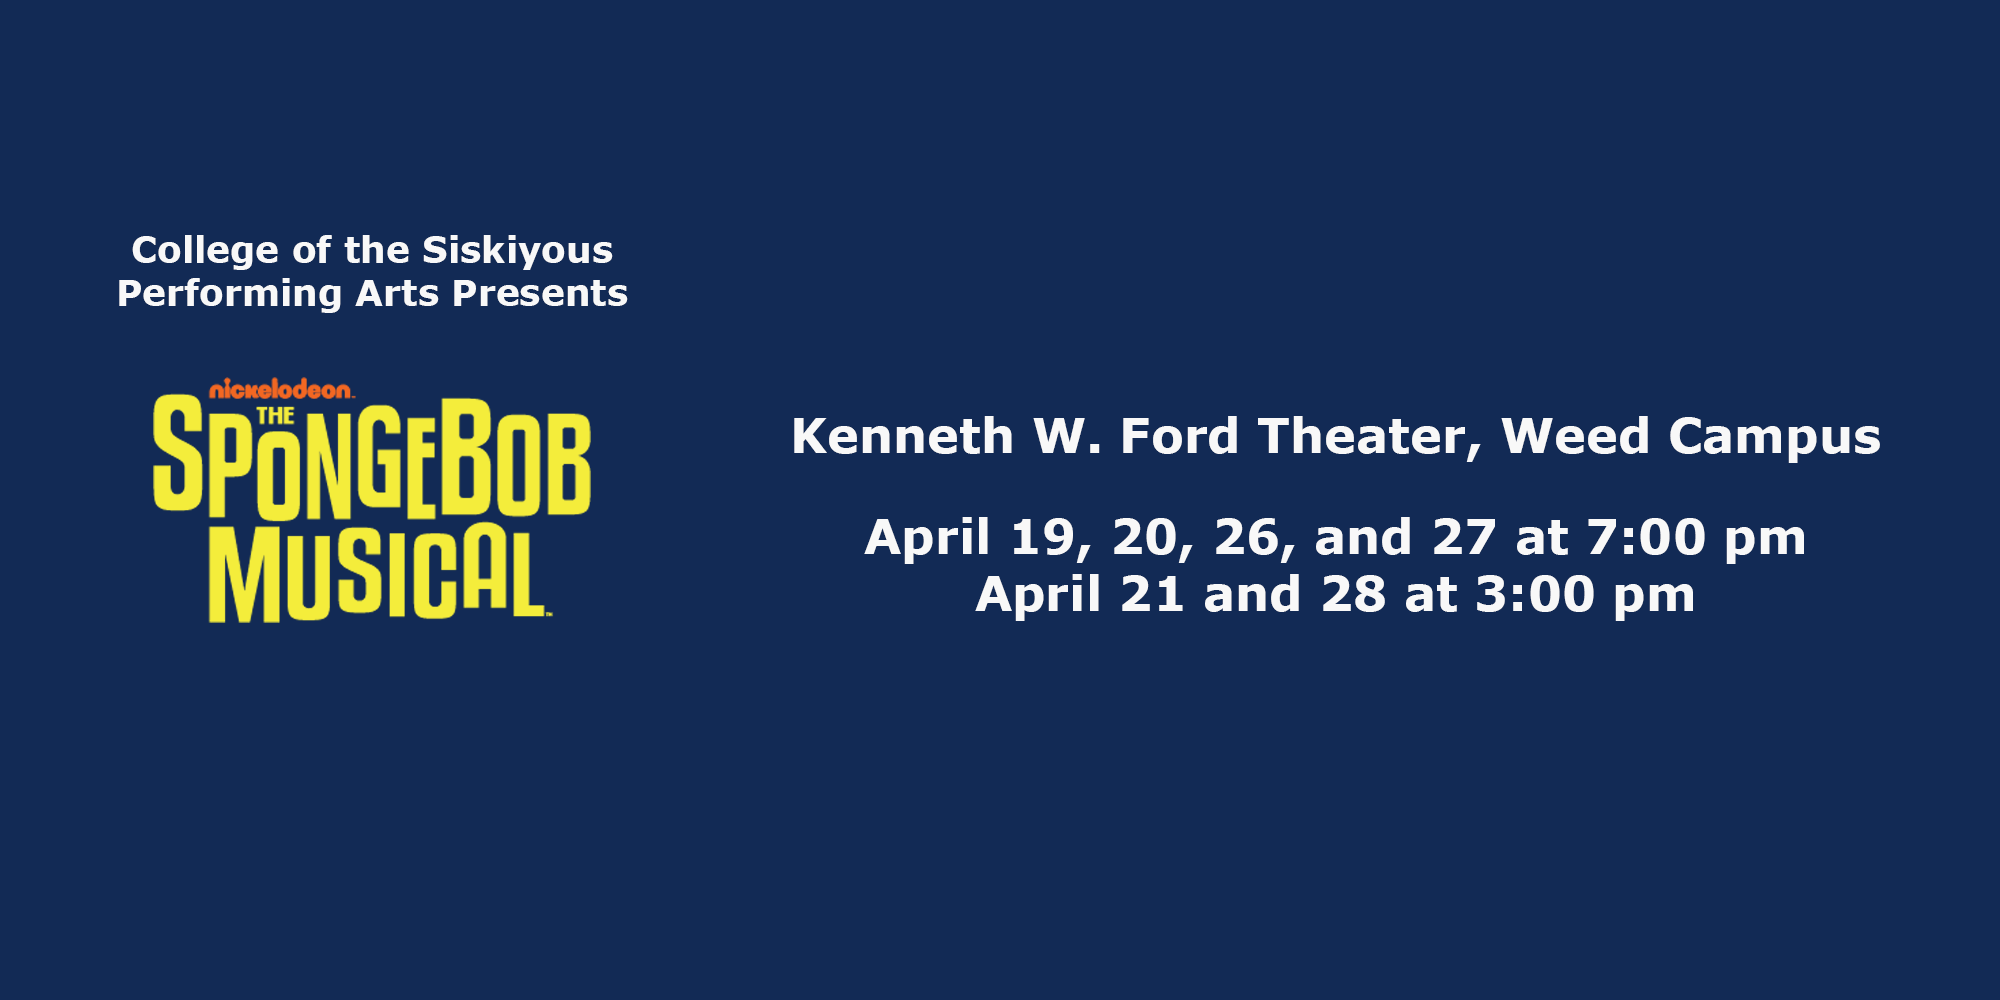 College of the Siskiyous Performing Arts Presents 'The SpongeBob Musical' - Kenneth W. Ford Theater, Weed Campus, April 19, 20, 26, and 27 at 7:00 pm. April 21 and 28 at 3:00 pm.